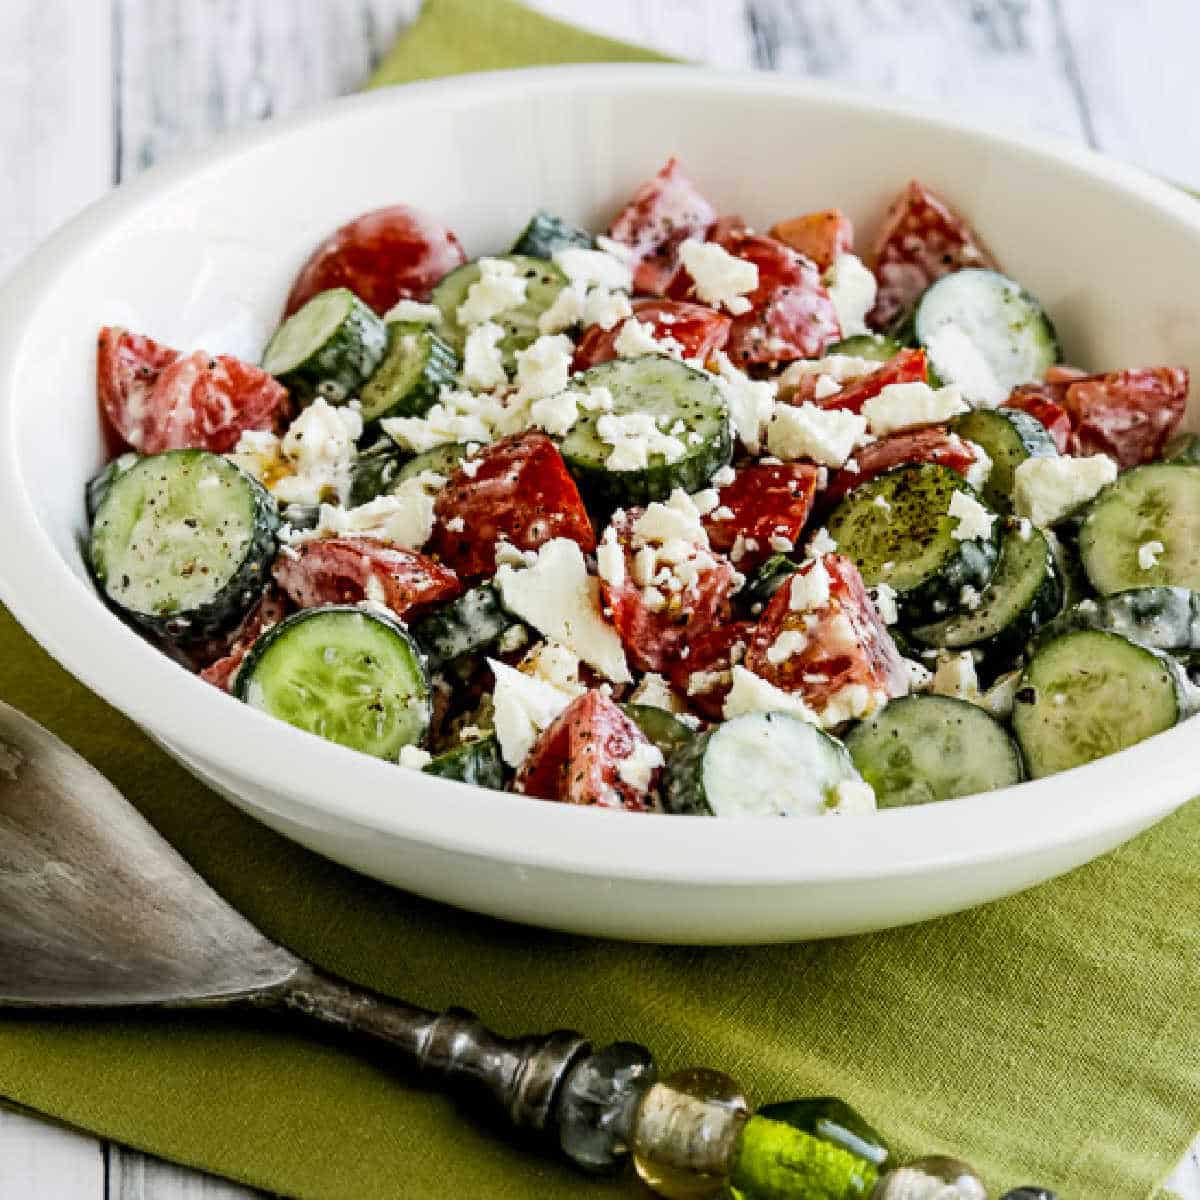 Square photo of summer lunch salad in a serving bowl